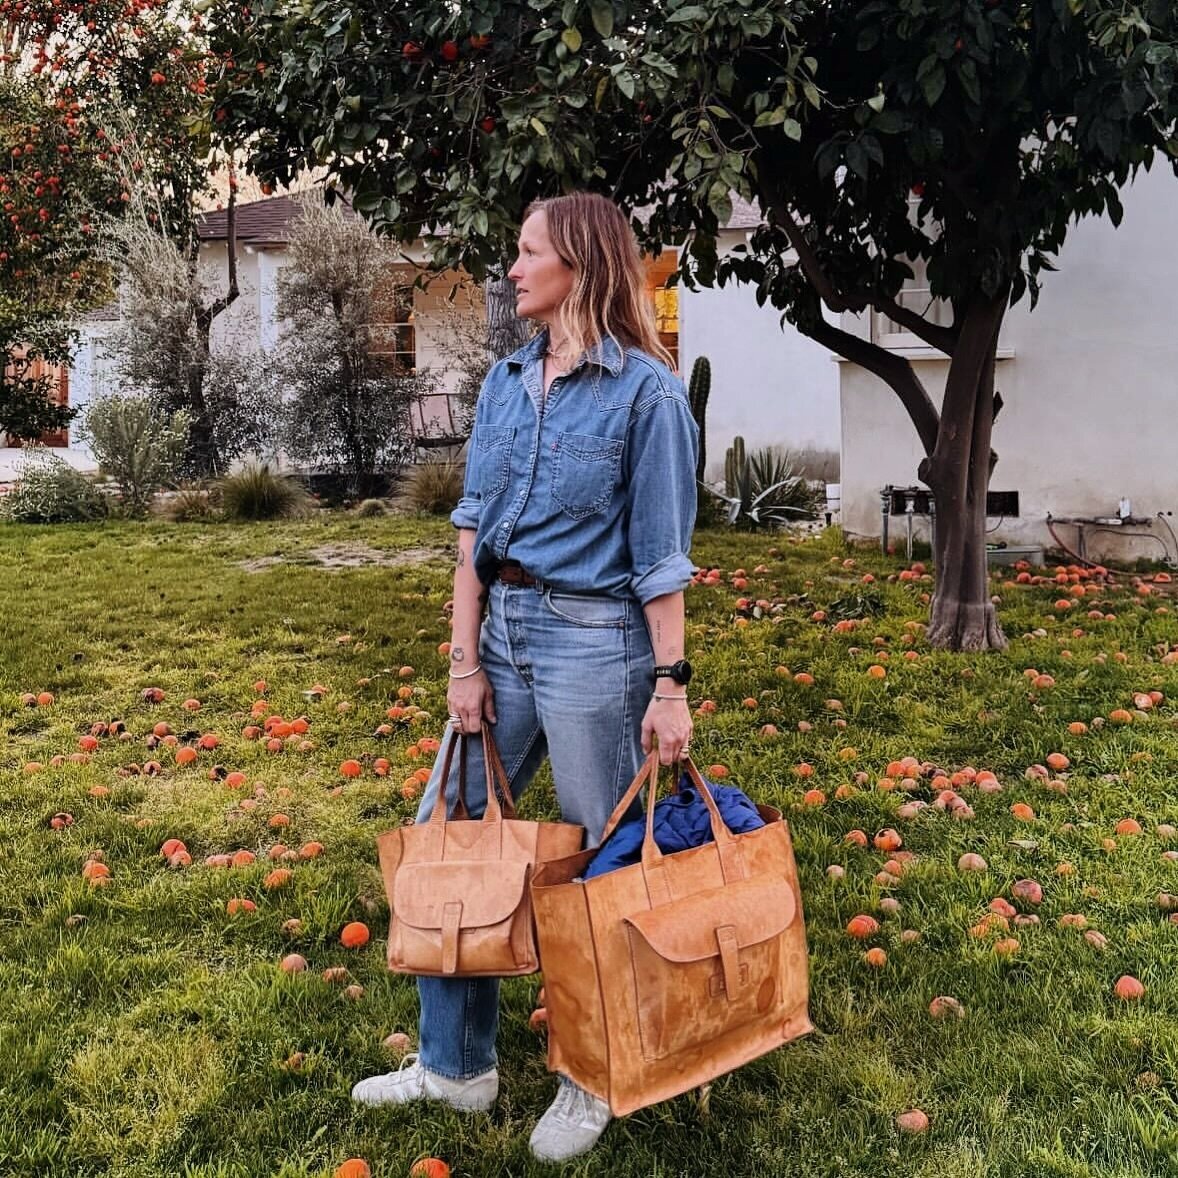 La belle @anais.wade, friend of the house, distance ocean swimmer(!) and photographer extraordinaire with her well loved, well worn, aged to perfection #sac1sac2 Natural Veggie Tan.

#agnesbaddoo #anaiswade #wellloved #wellworn #agedtoperfection #lea